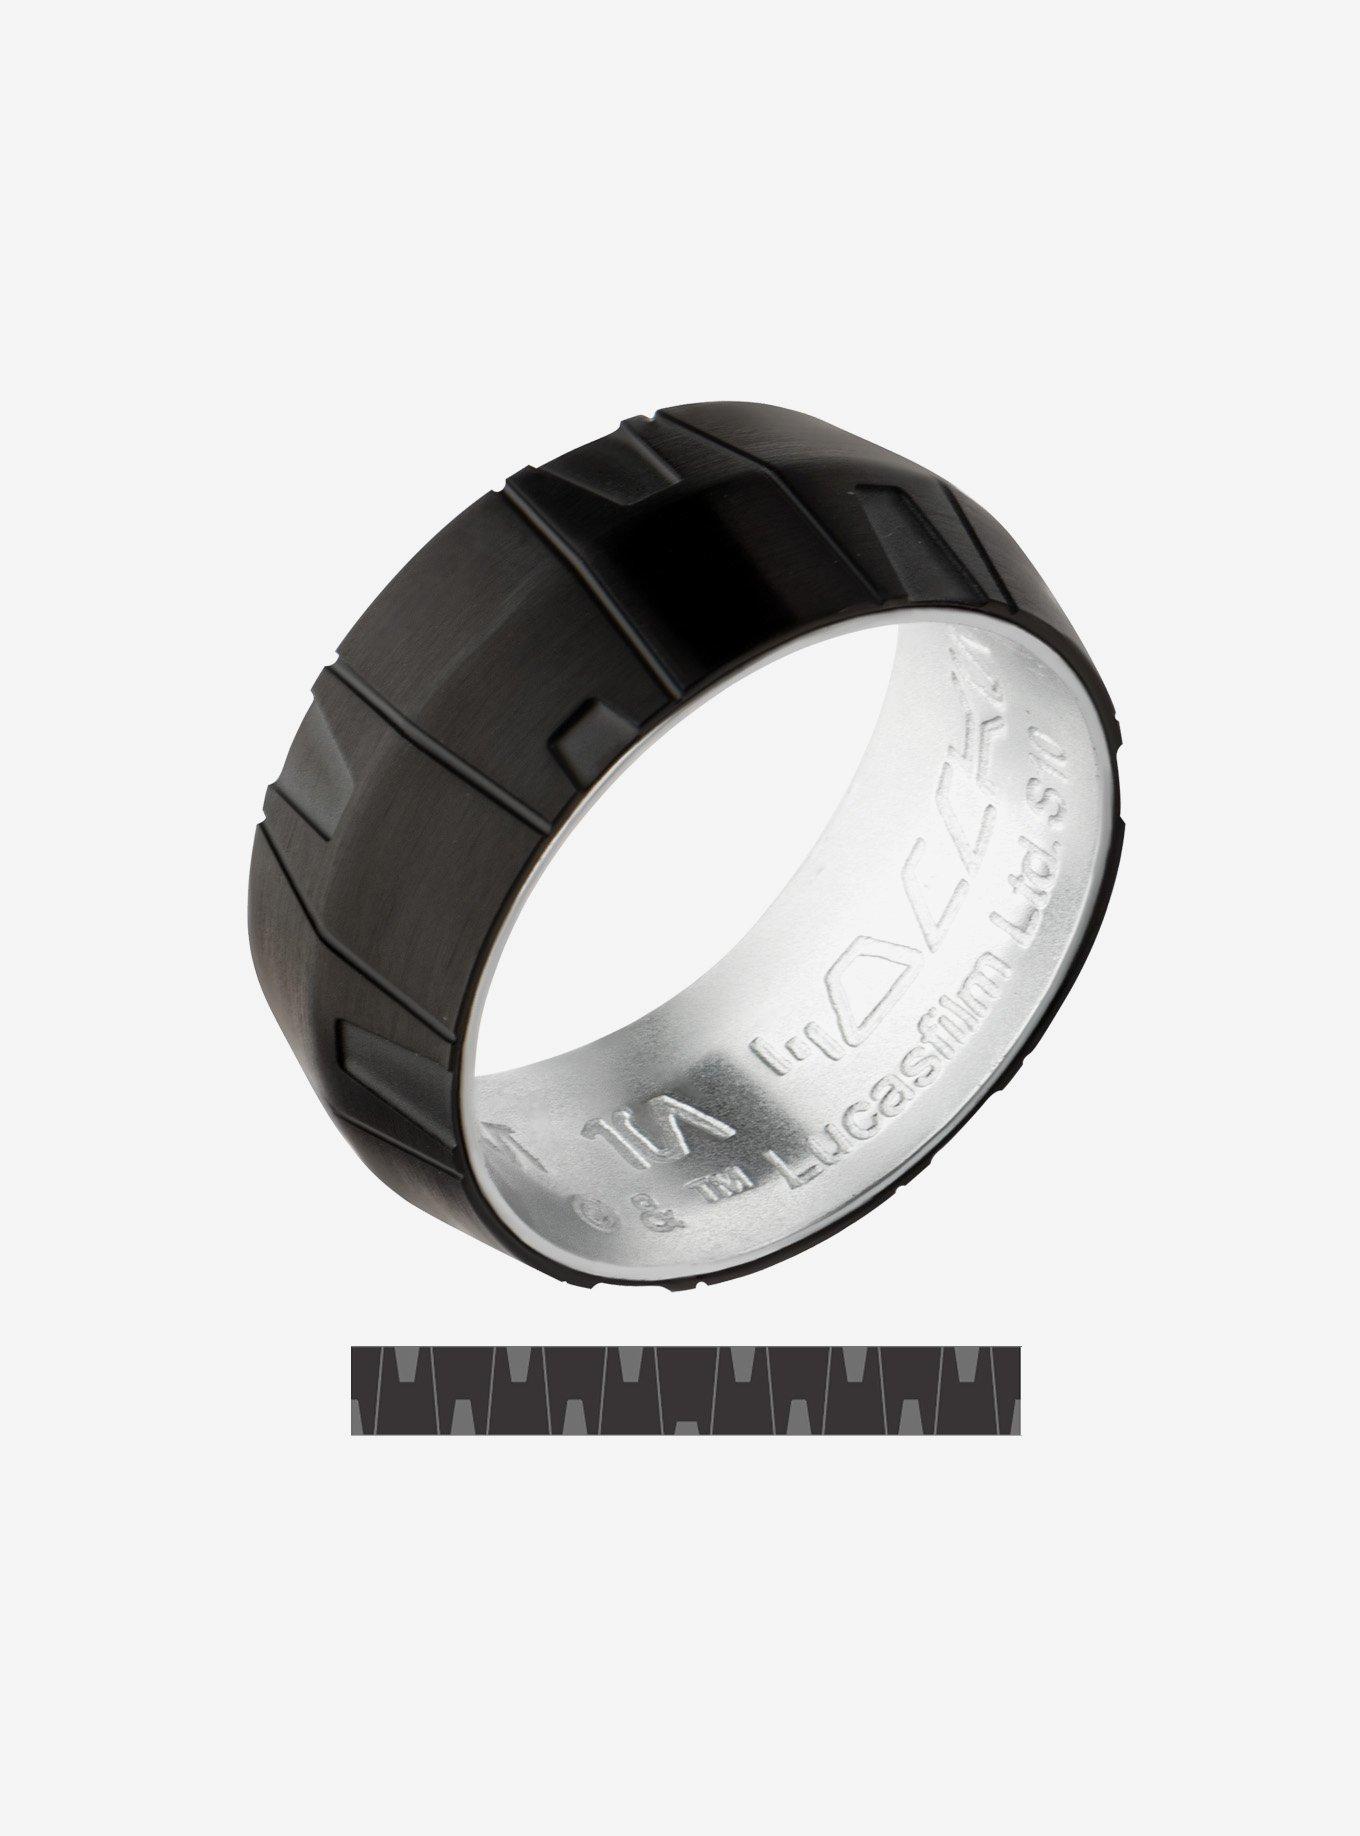 Star Wars Vader Meditation Chamber You Are In Command Ring, MULTI, hi-res